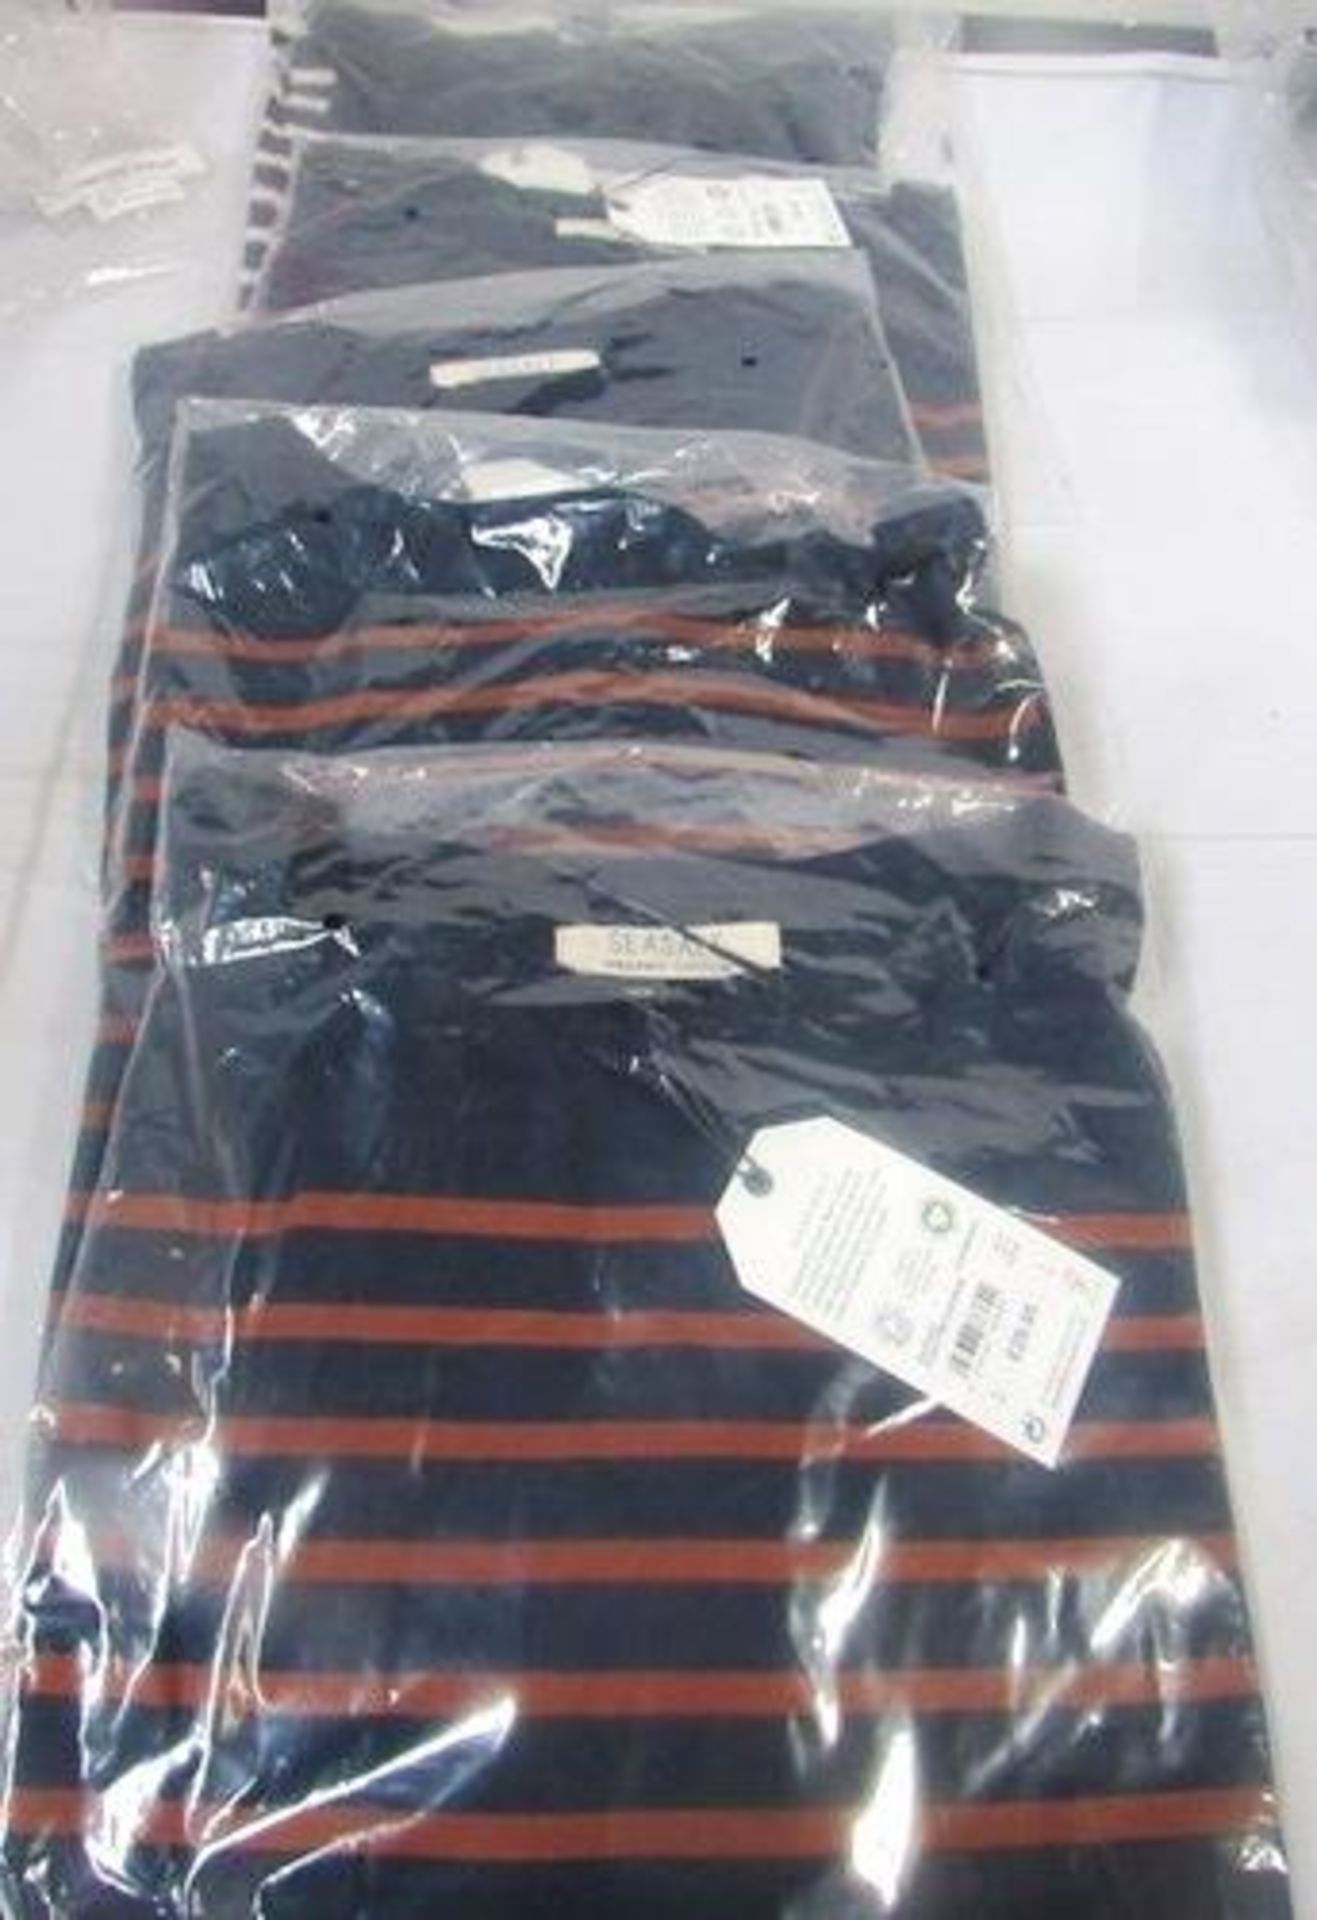 5 x Sea Salt Breton t-shirts in various sizes - Sealed new in pack (ESB17A)